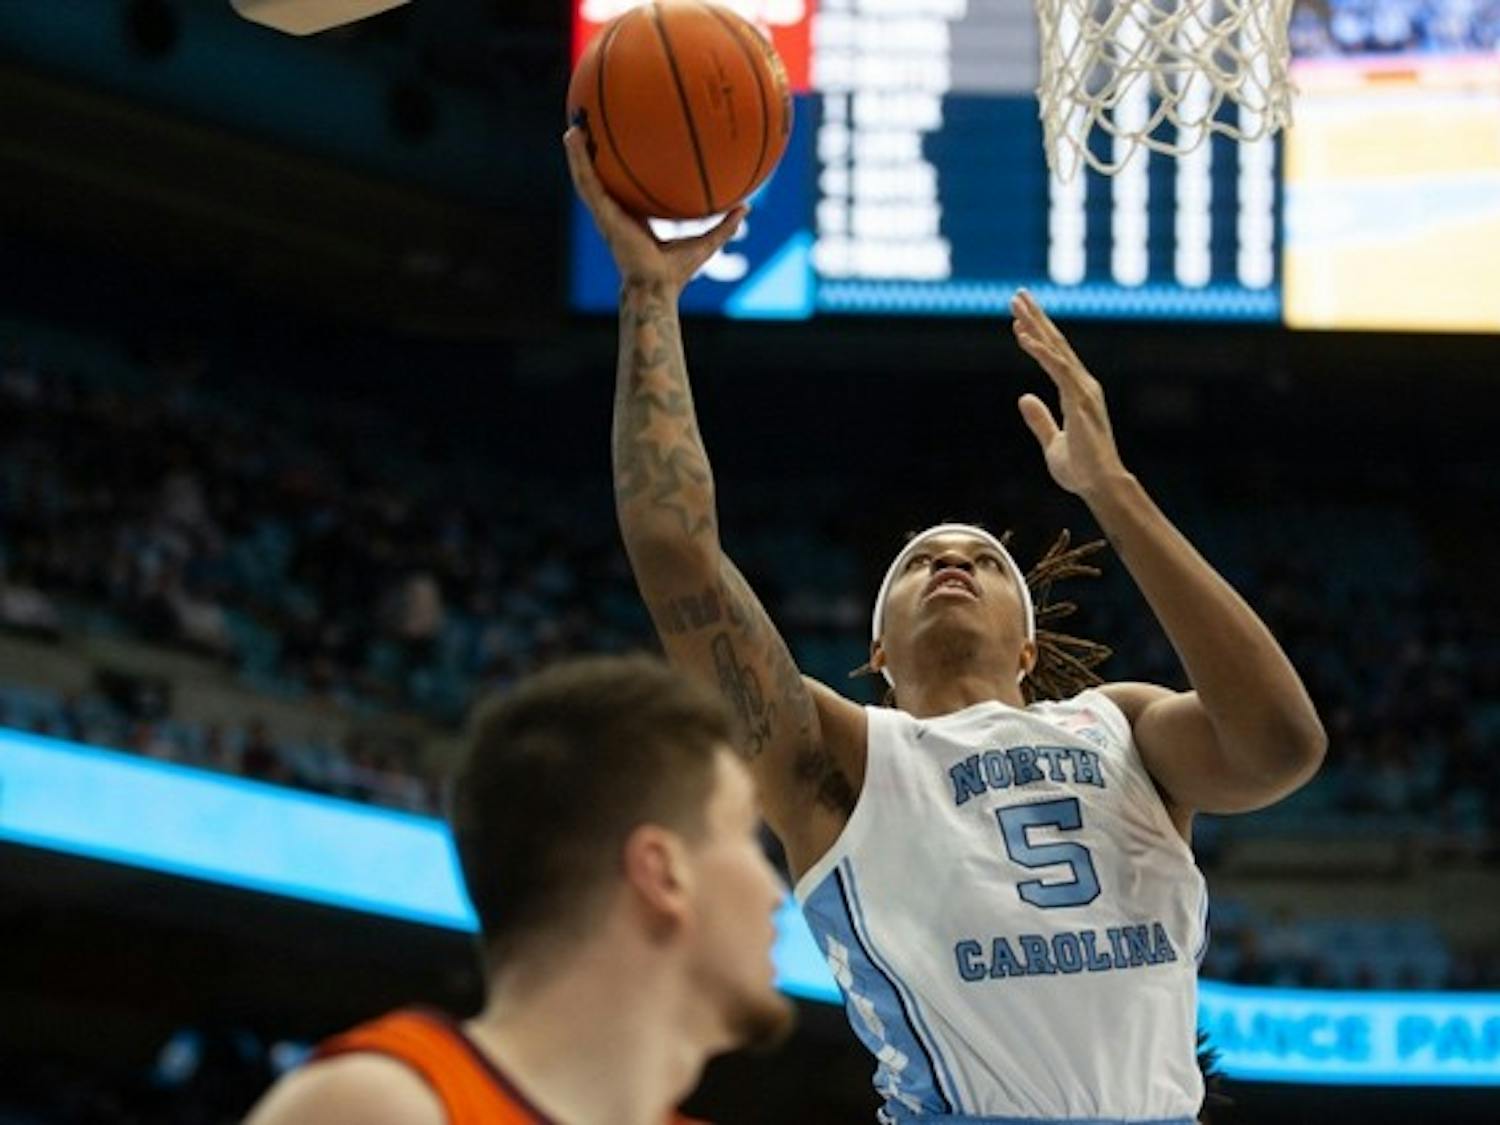 Junior forward Armando Bacot (5) puts the ball up at the game against Virginia Tech on Jan. 24, 2022 at the Smith Center. UNC won 78-68.